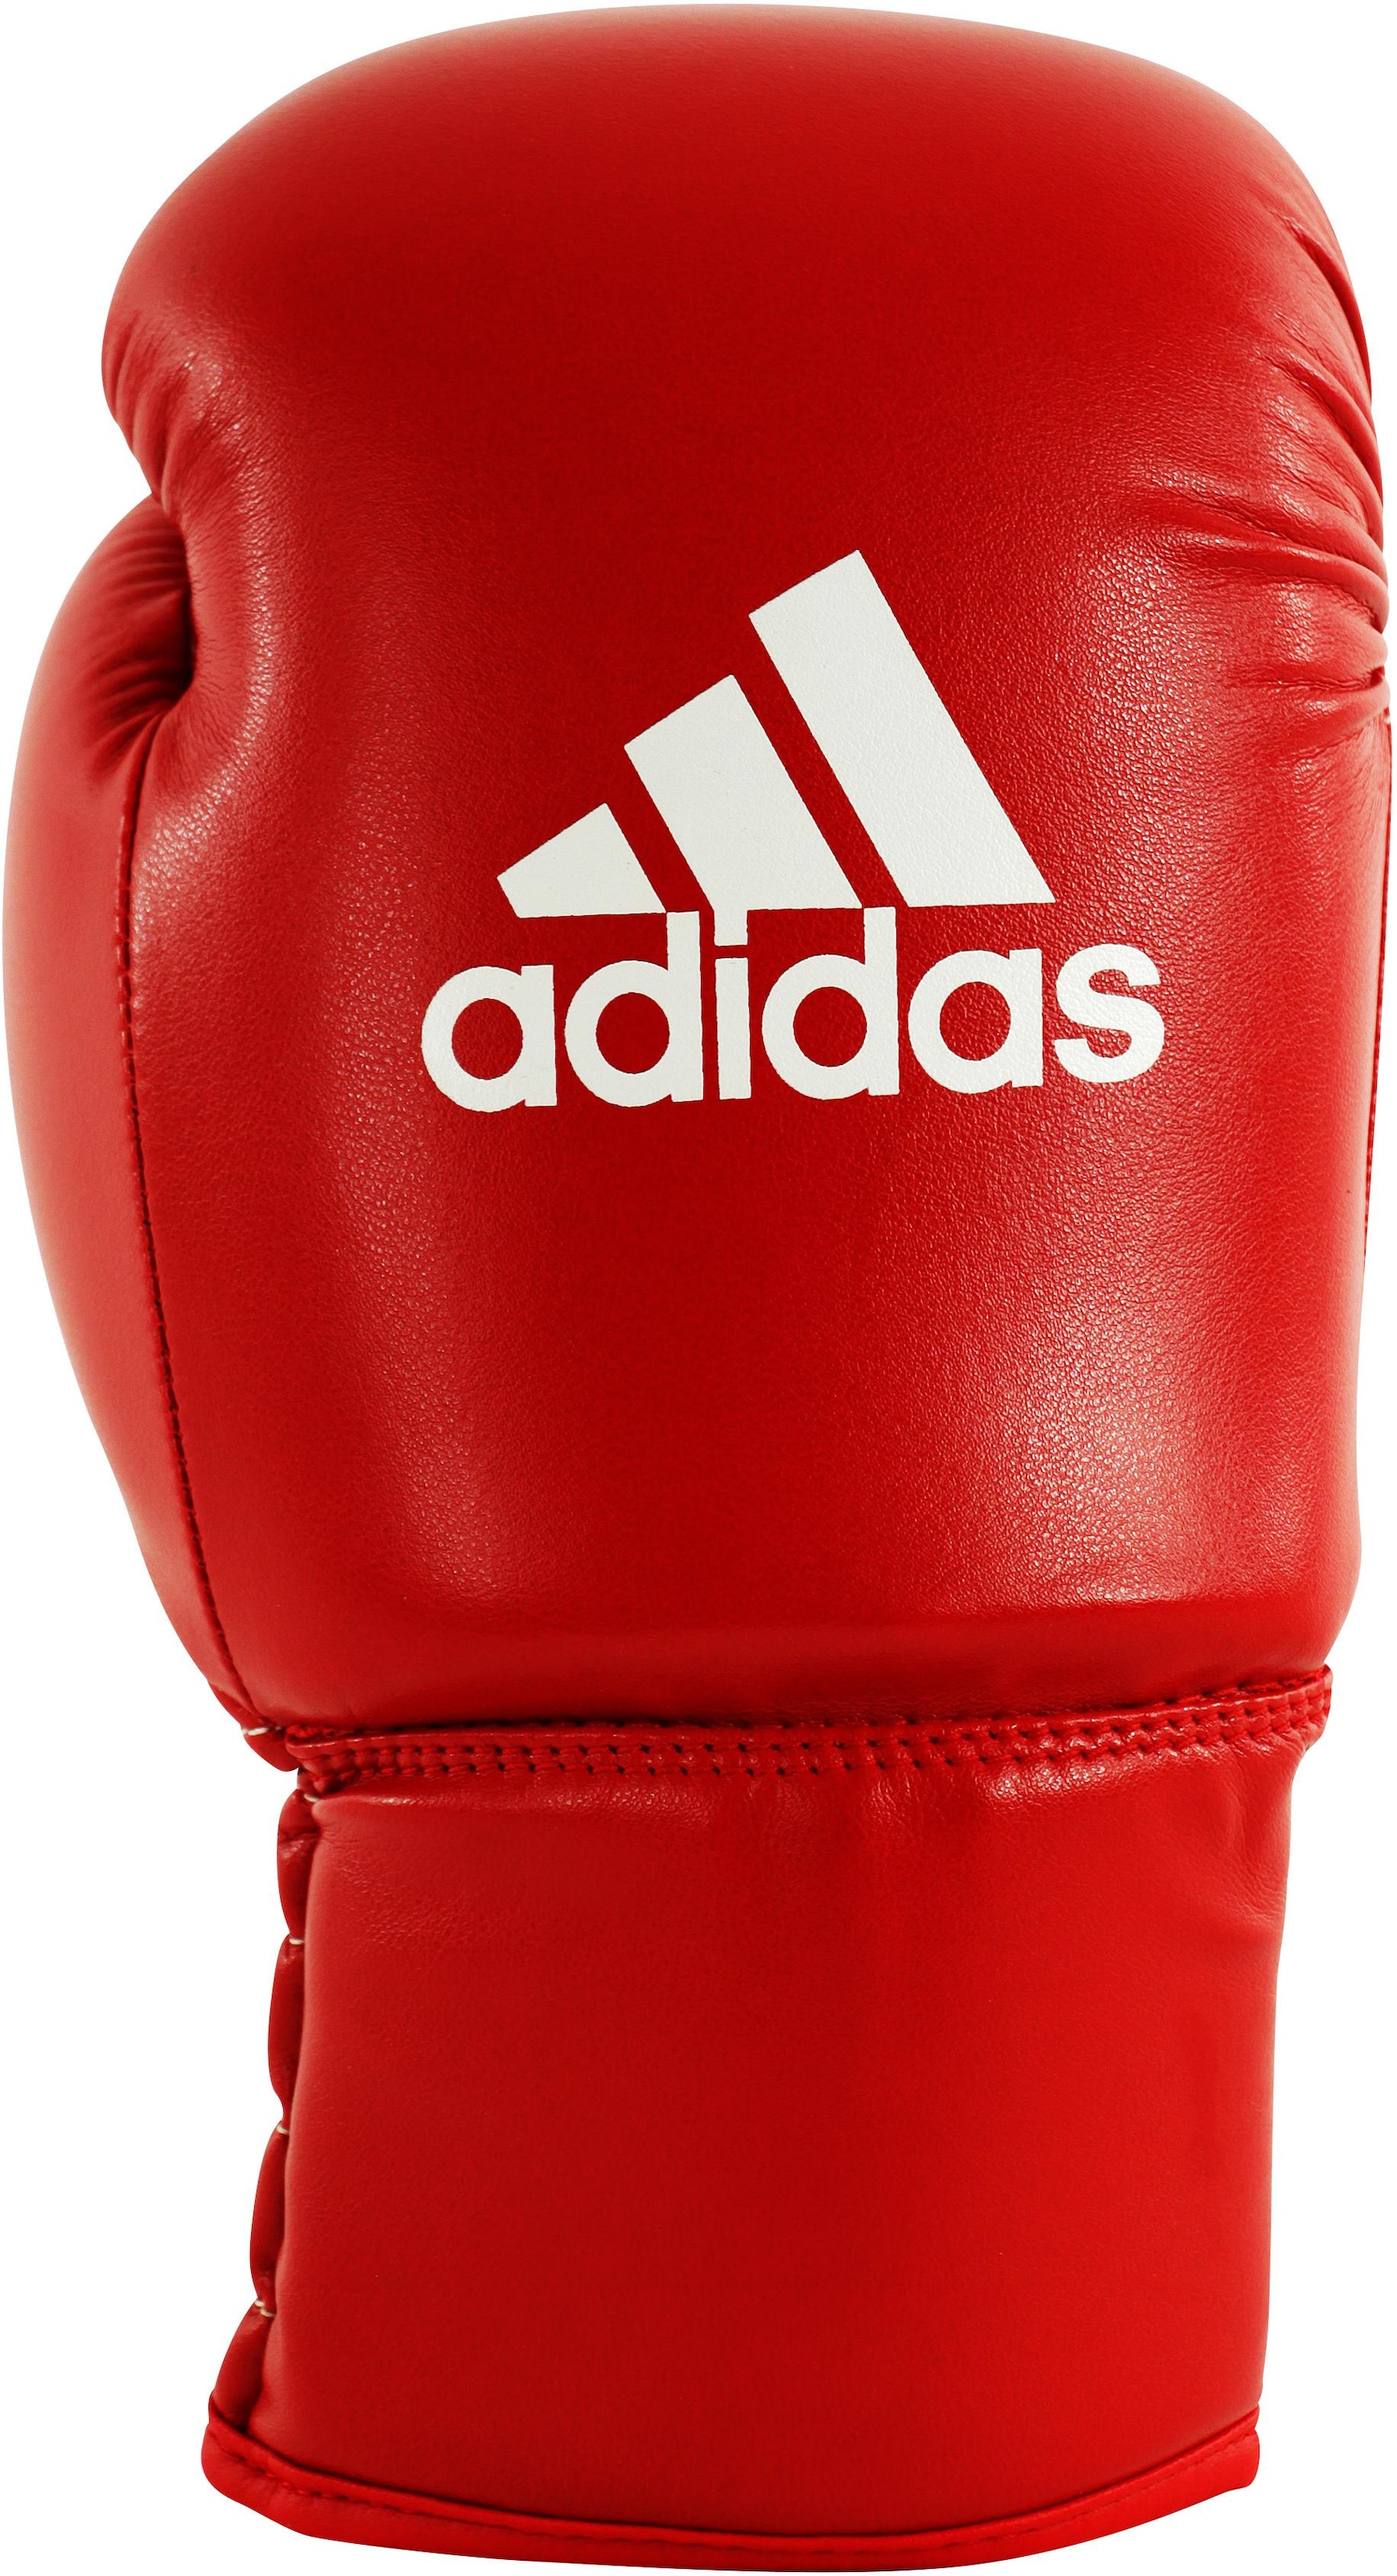 adidas Performance Boxhandschuhe »ROOKIE« bei online OTTO